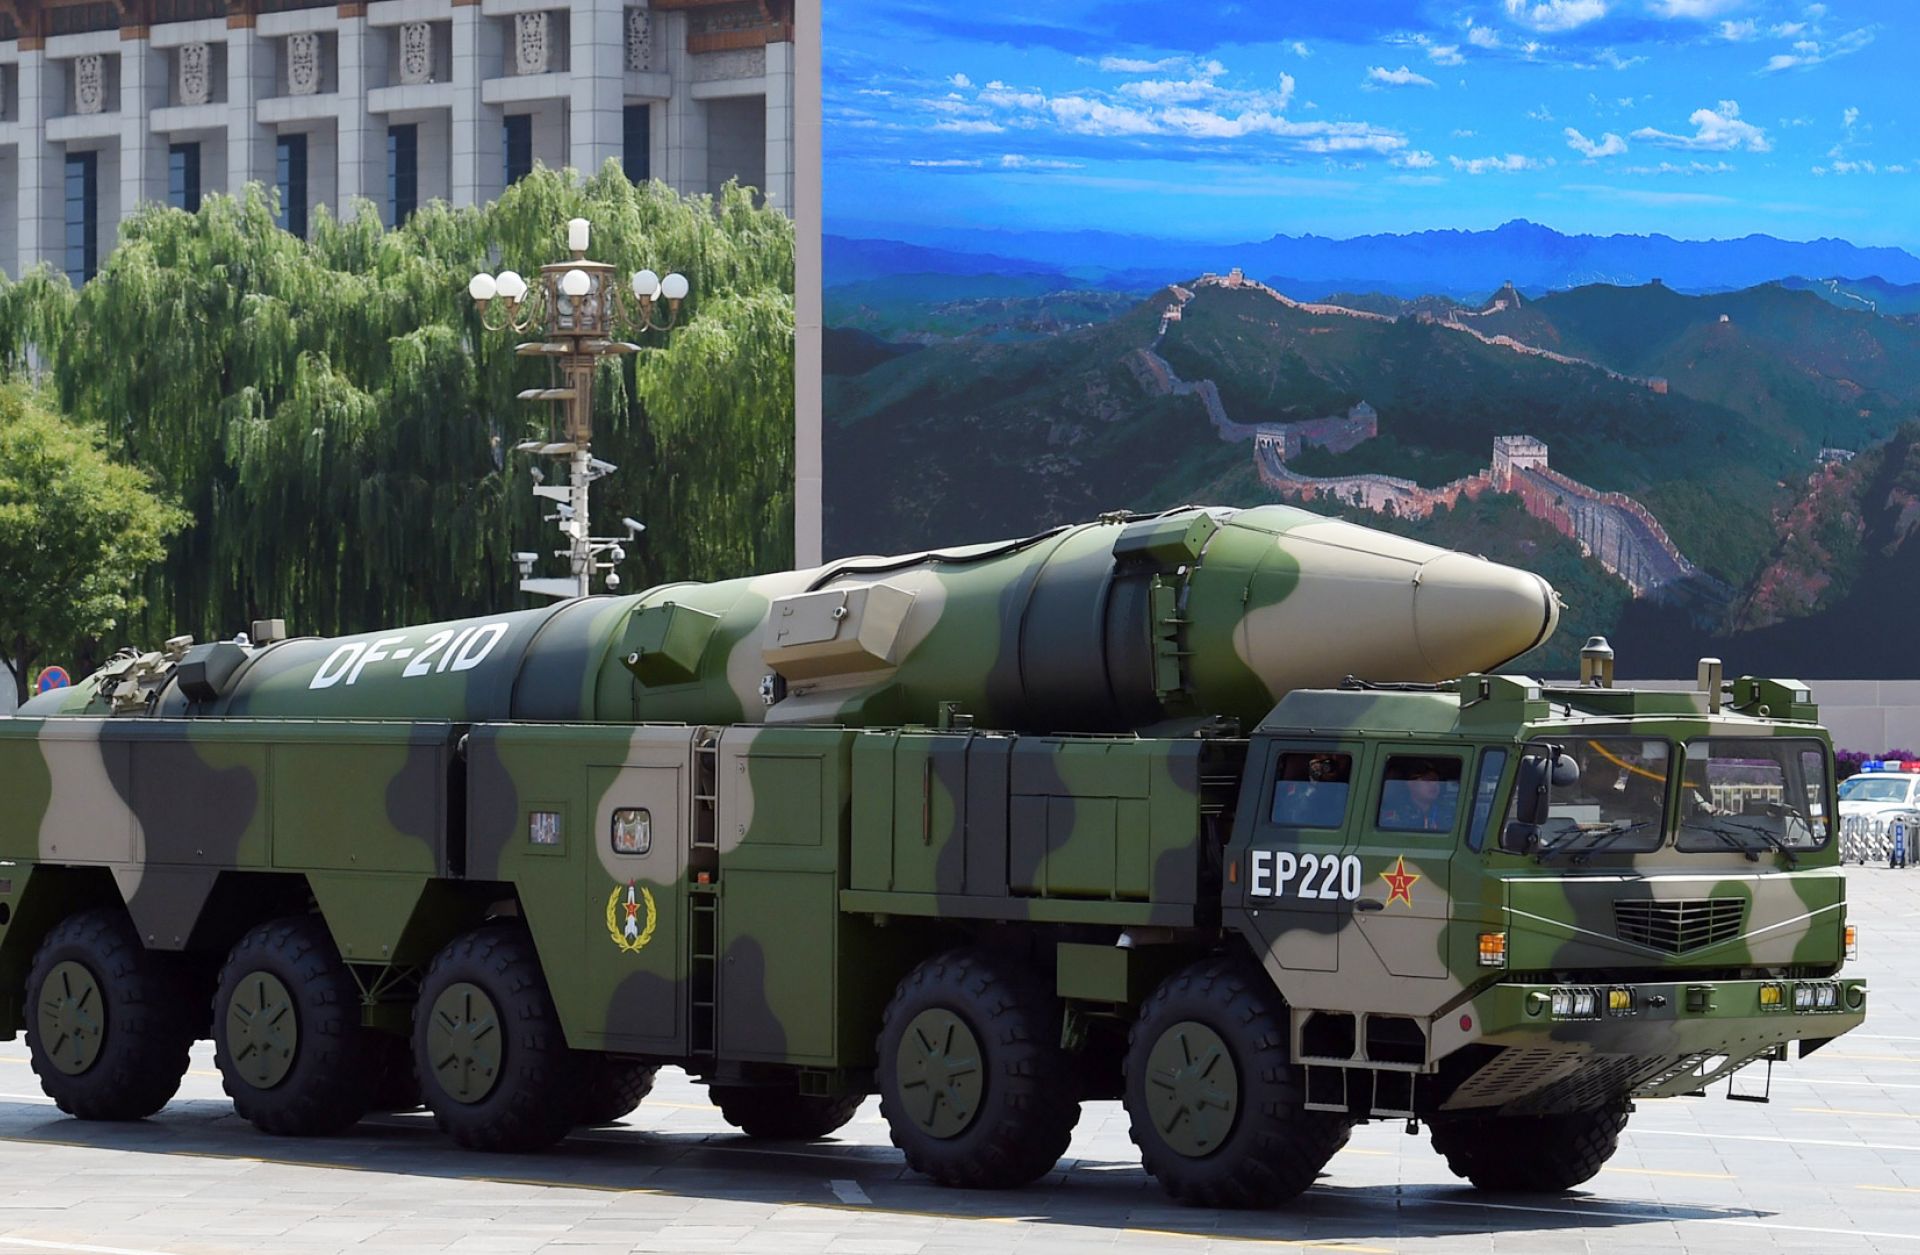 A Chinese Nuclear Deterrent Aimed at the U.S.